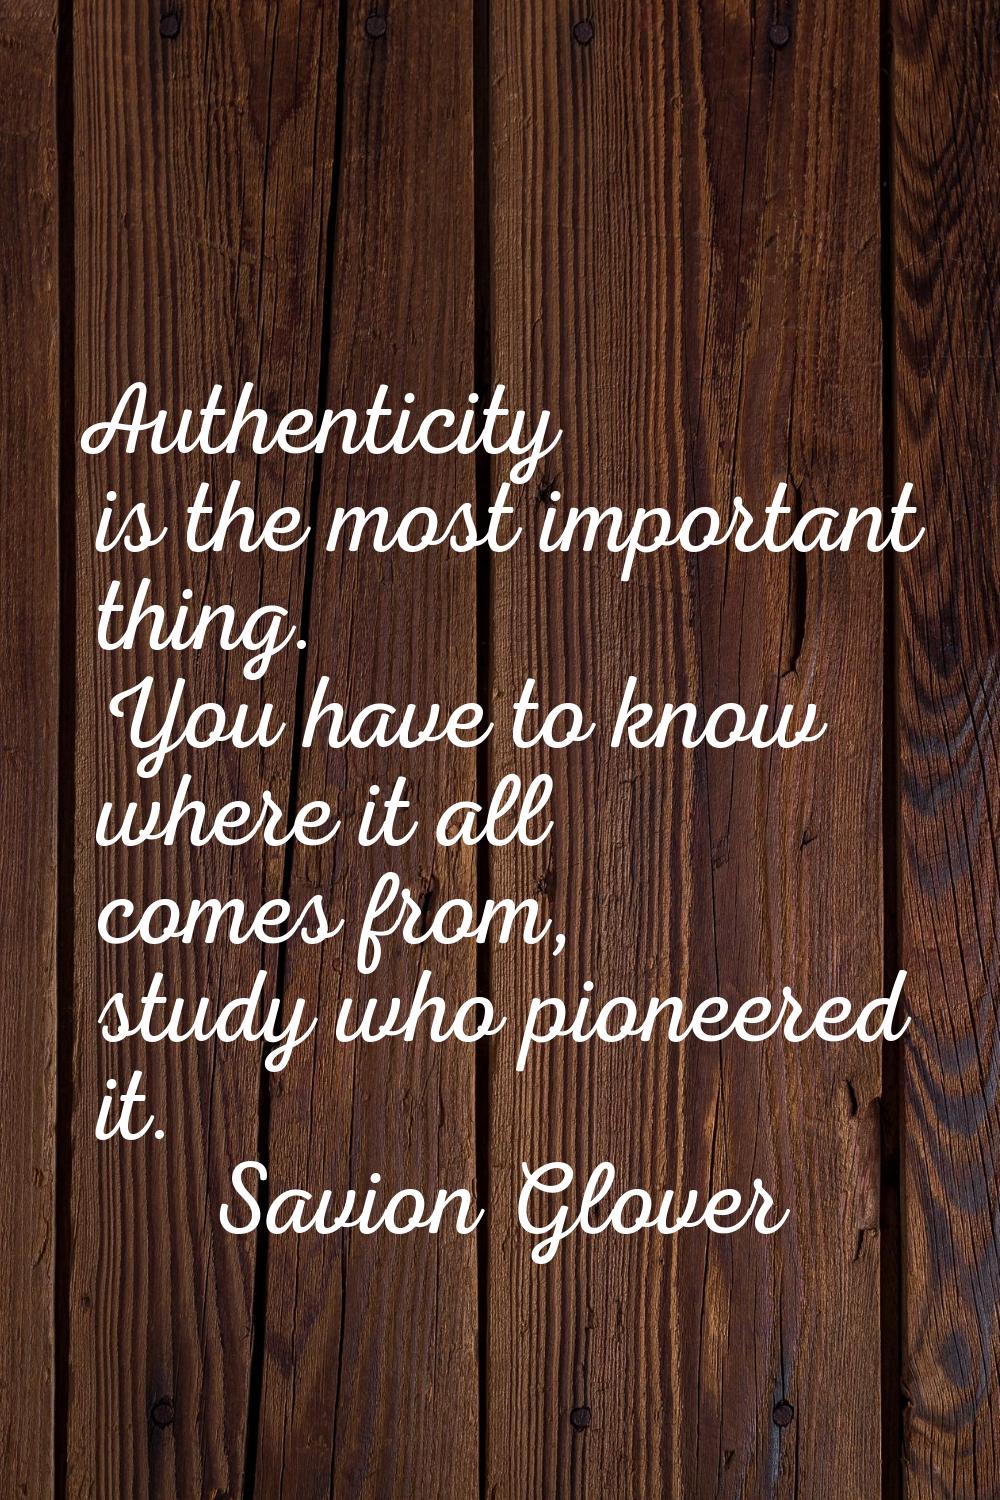 Authenticity is the most important thing. You have to know where it all comes from, study who pione